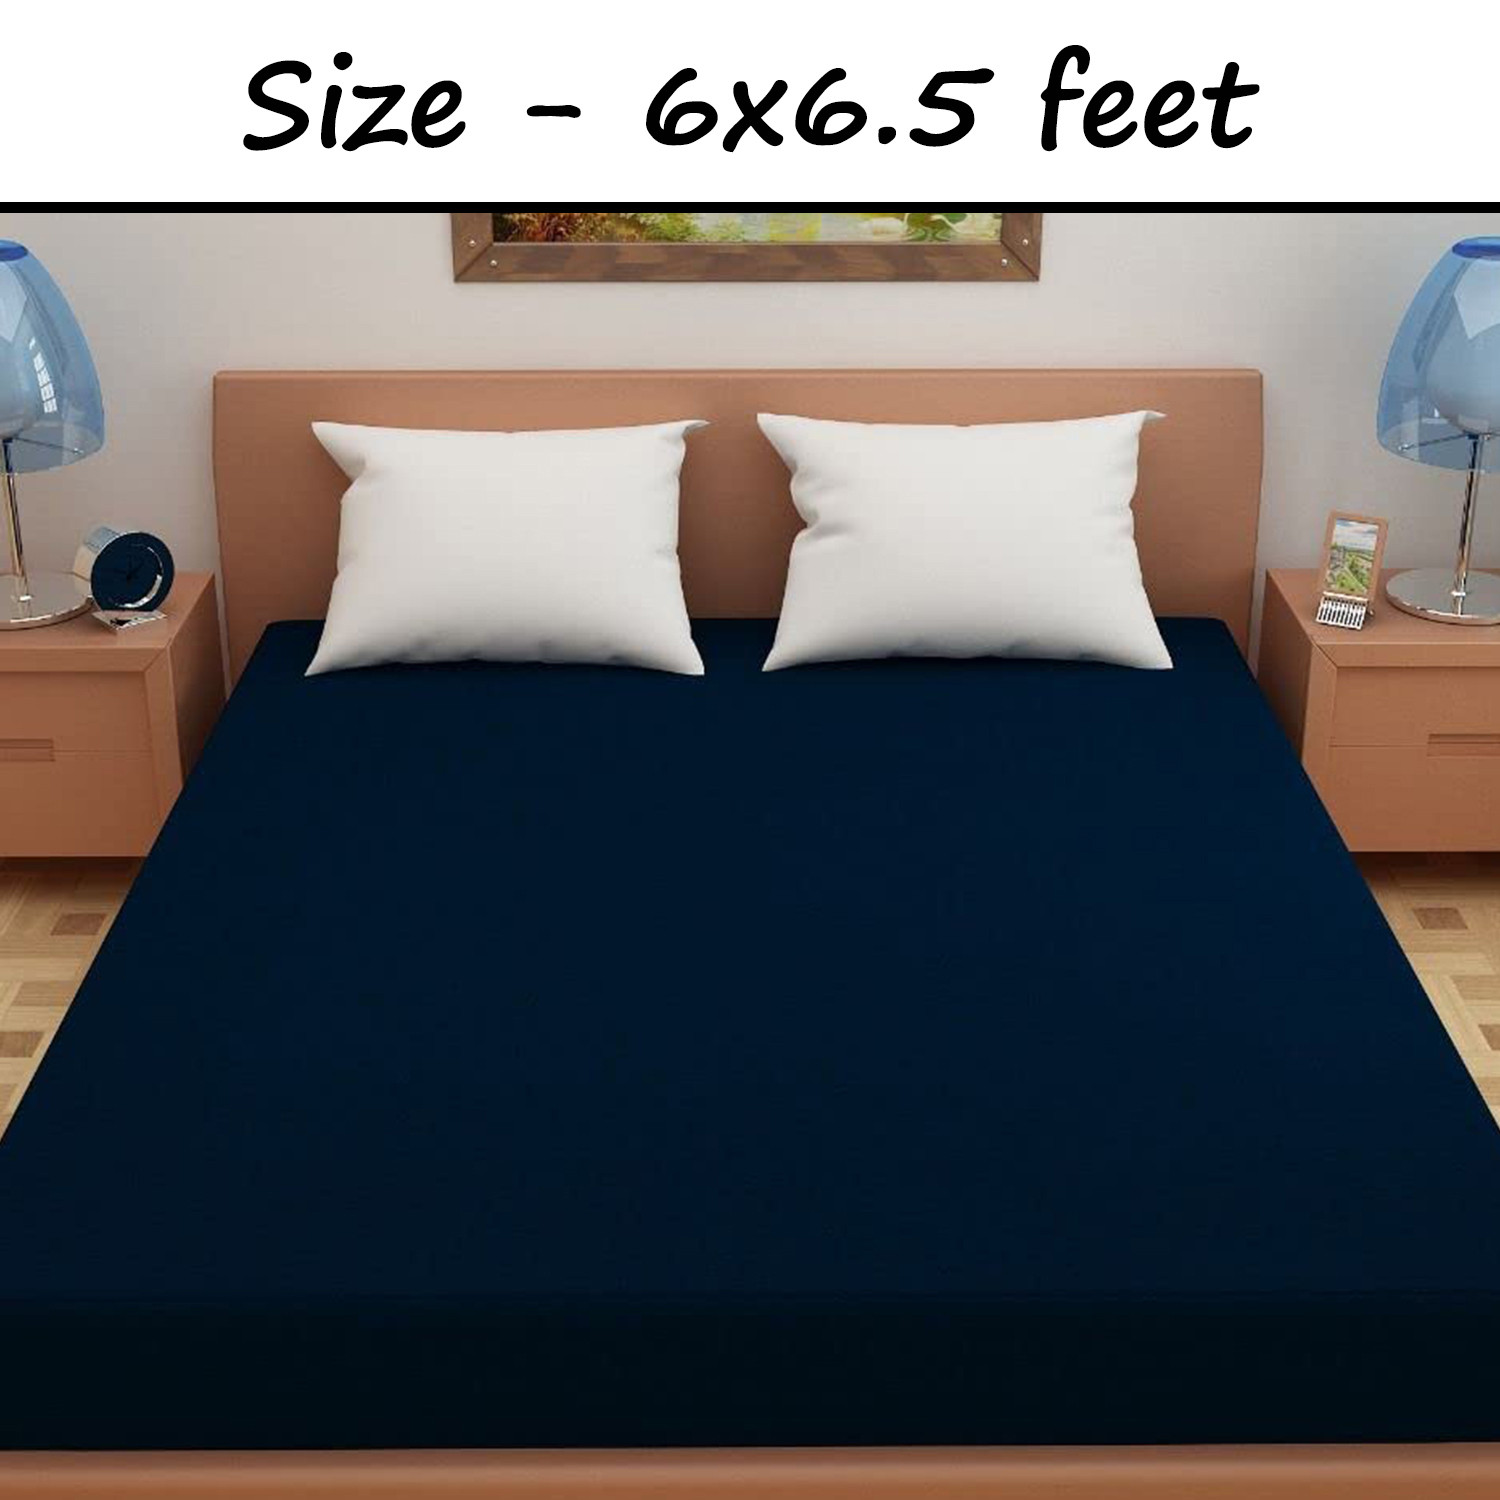 Kuber Industries Waterproof Double Bed Mattress Cover|Breathable Terry Cotton Surface & Elastic Fitted Mattress Protector,6 x 6.5 Ft. (Dark Blue)